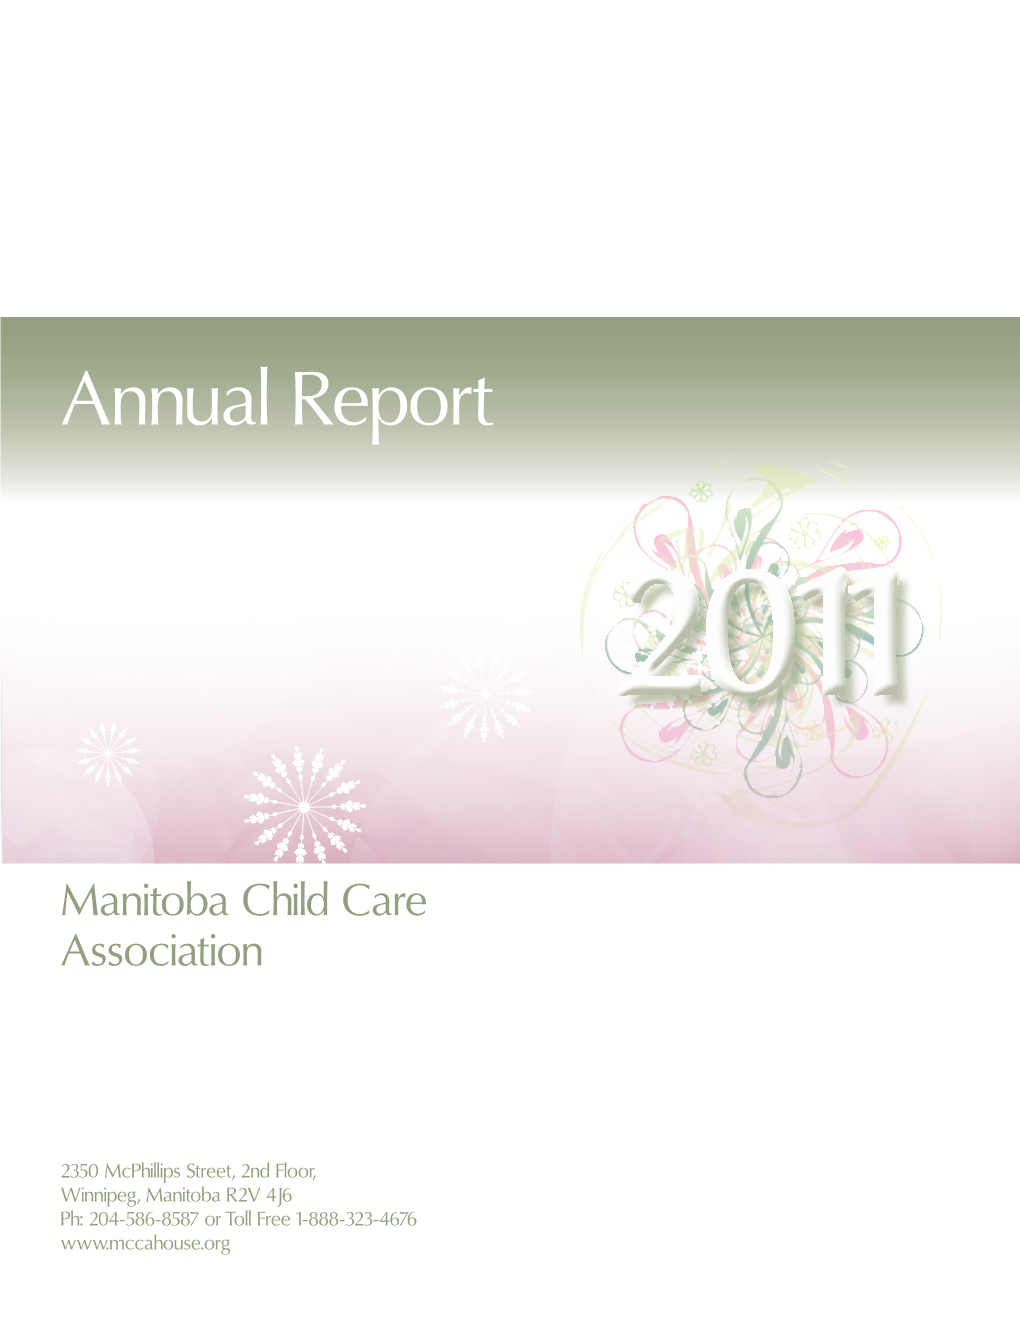 Download a Copy of Our 2011 Annual Report